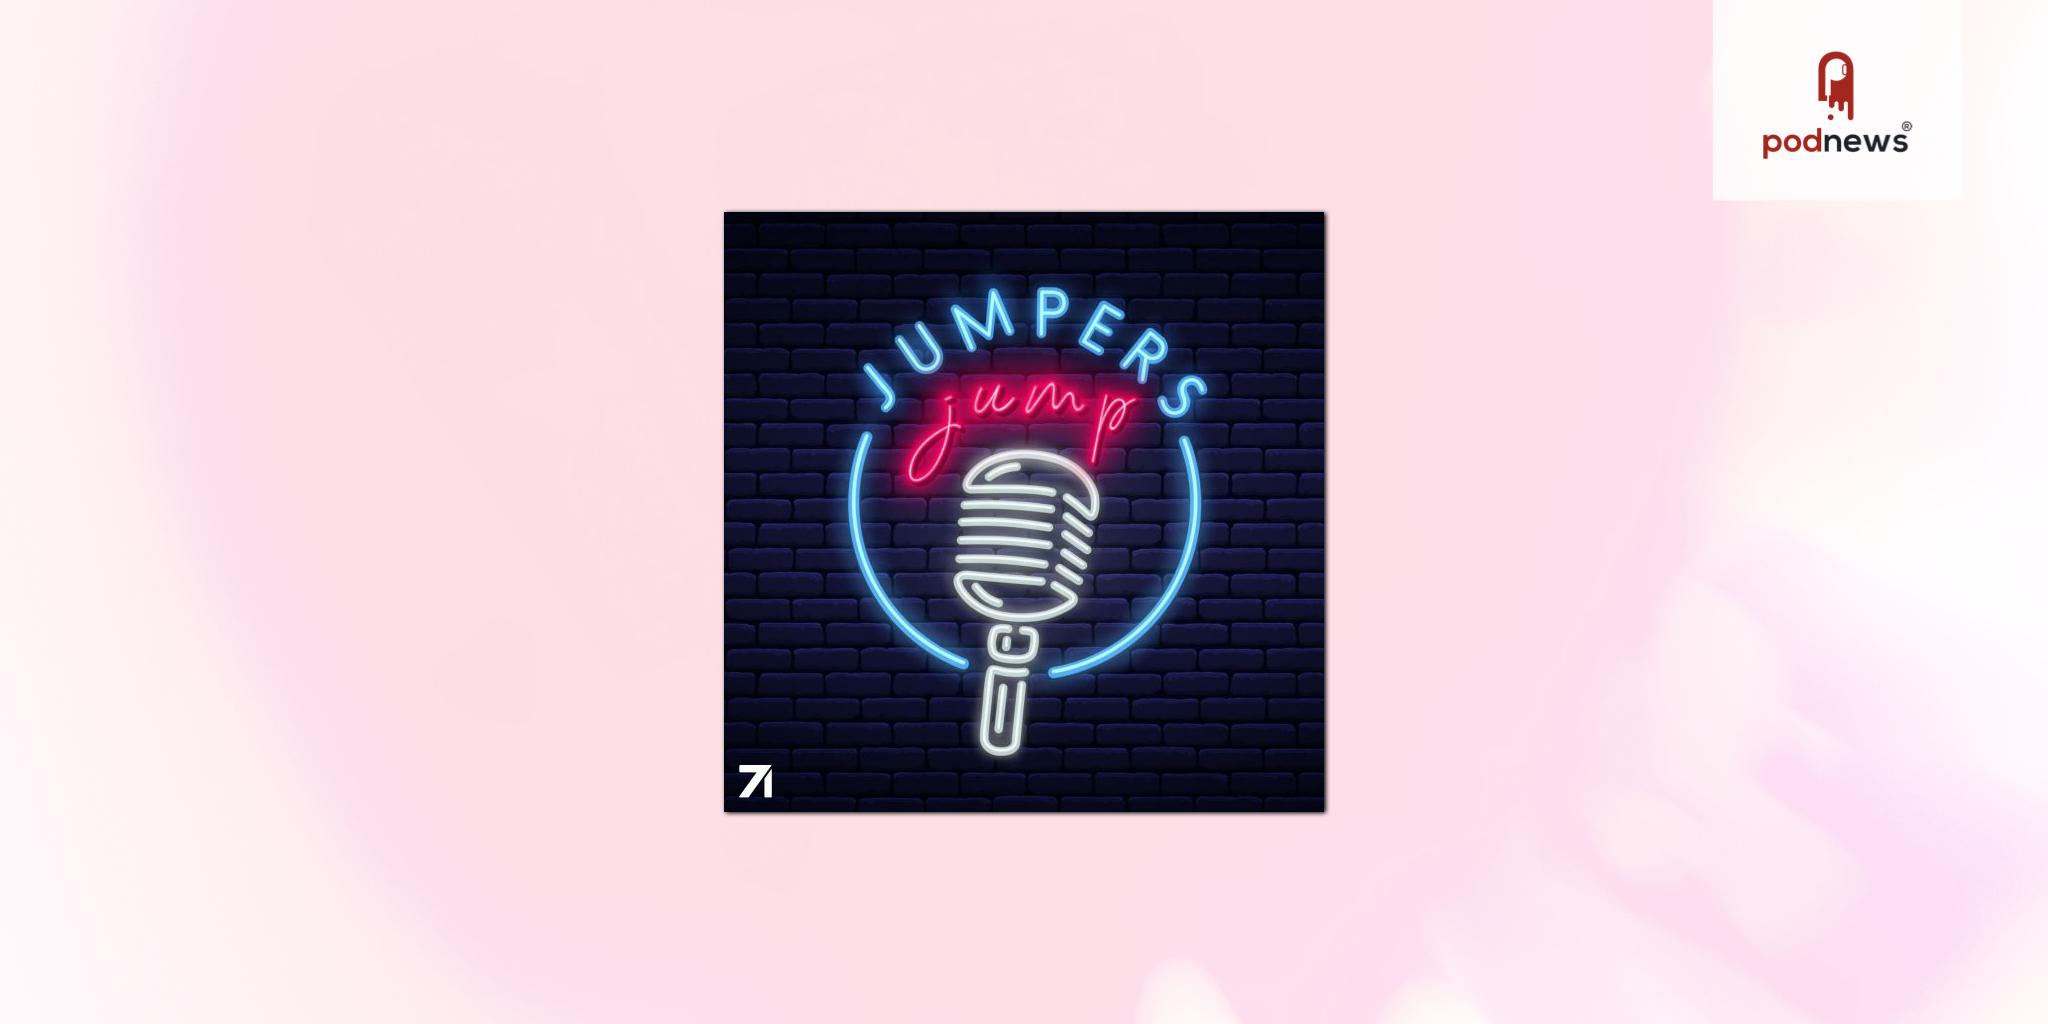 Studio71 signs successful simulcast podcast Jumpers Jump, joining over 100 simulcast podcasts on YouTube